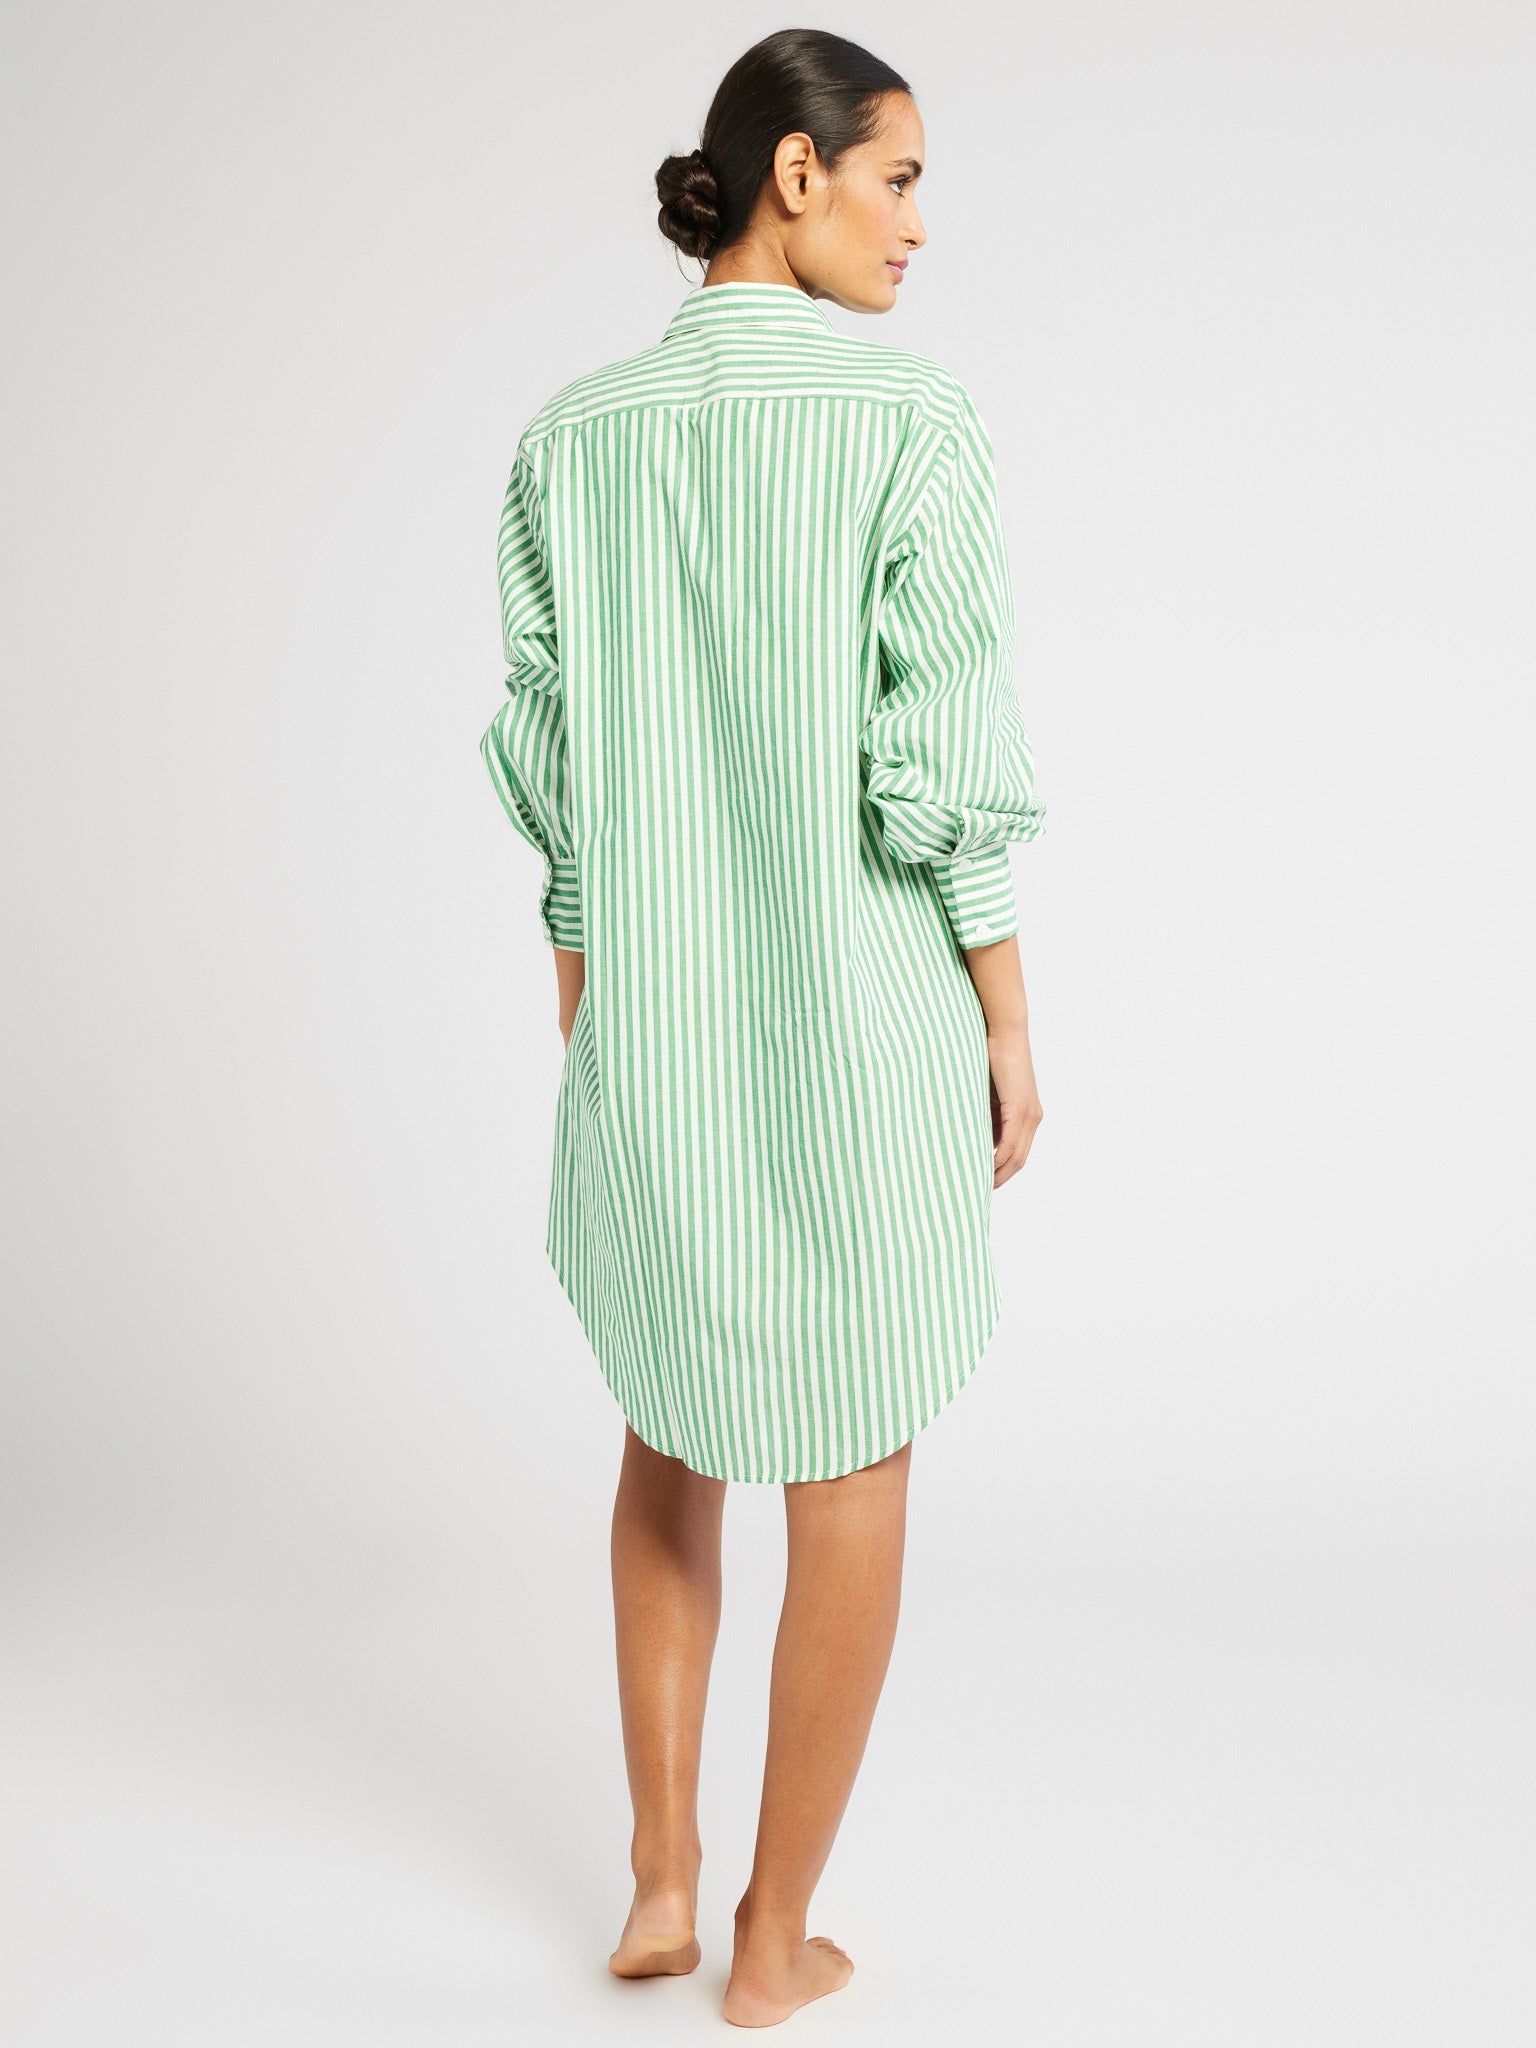 MILLE Clothing Holly Mini Dress in Kelly Stripe